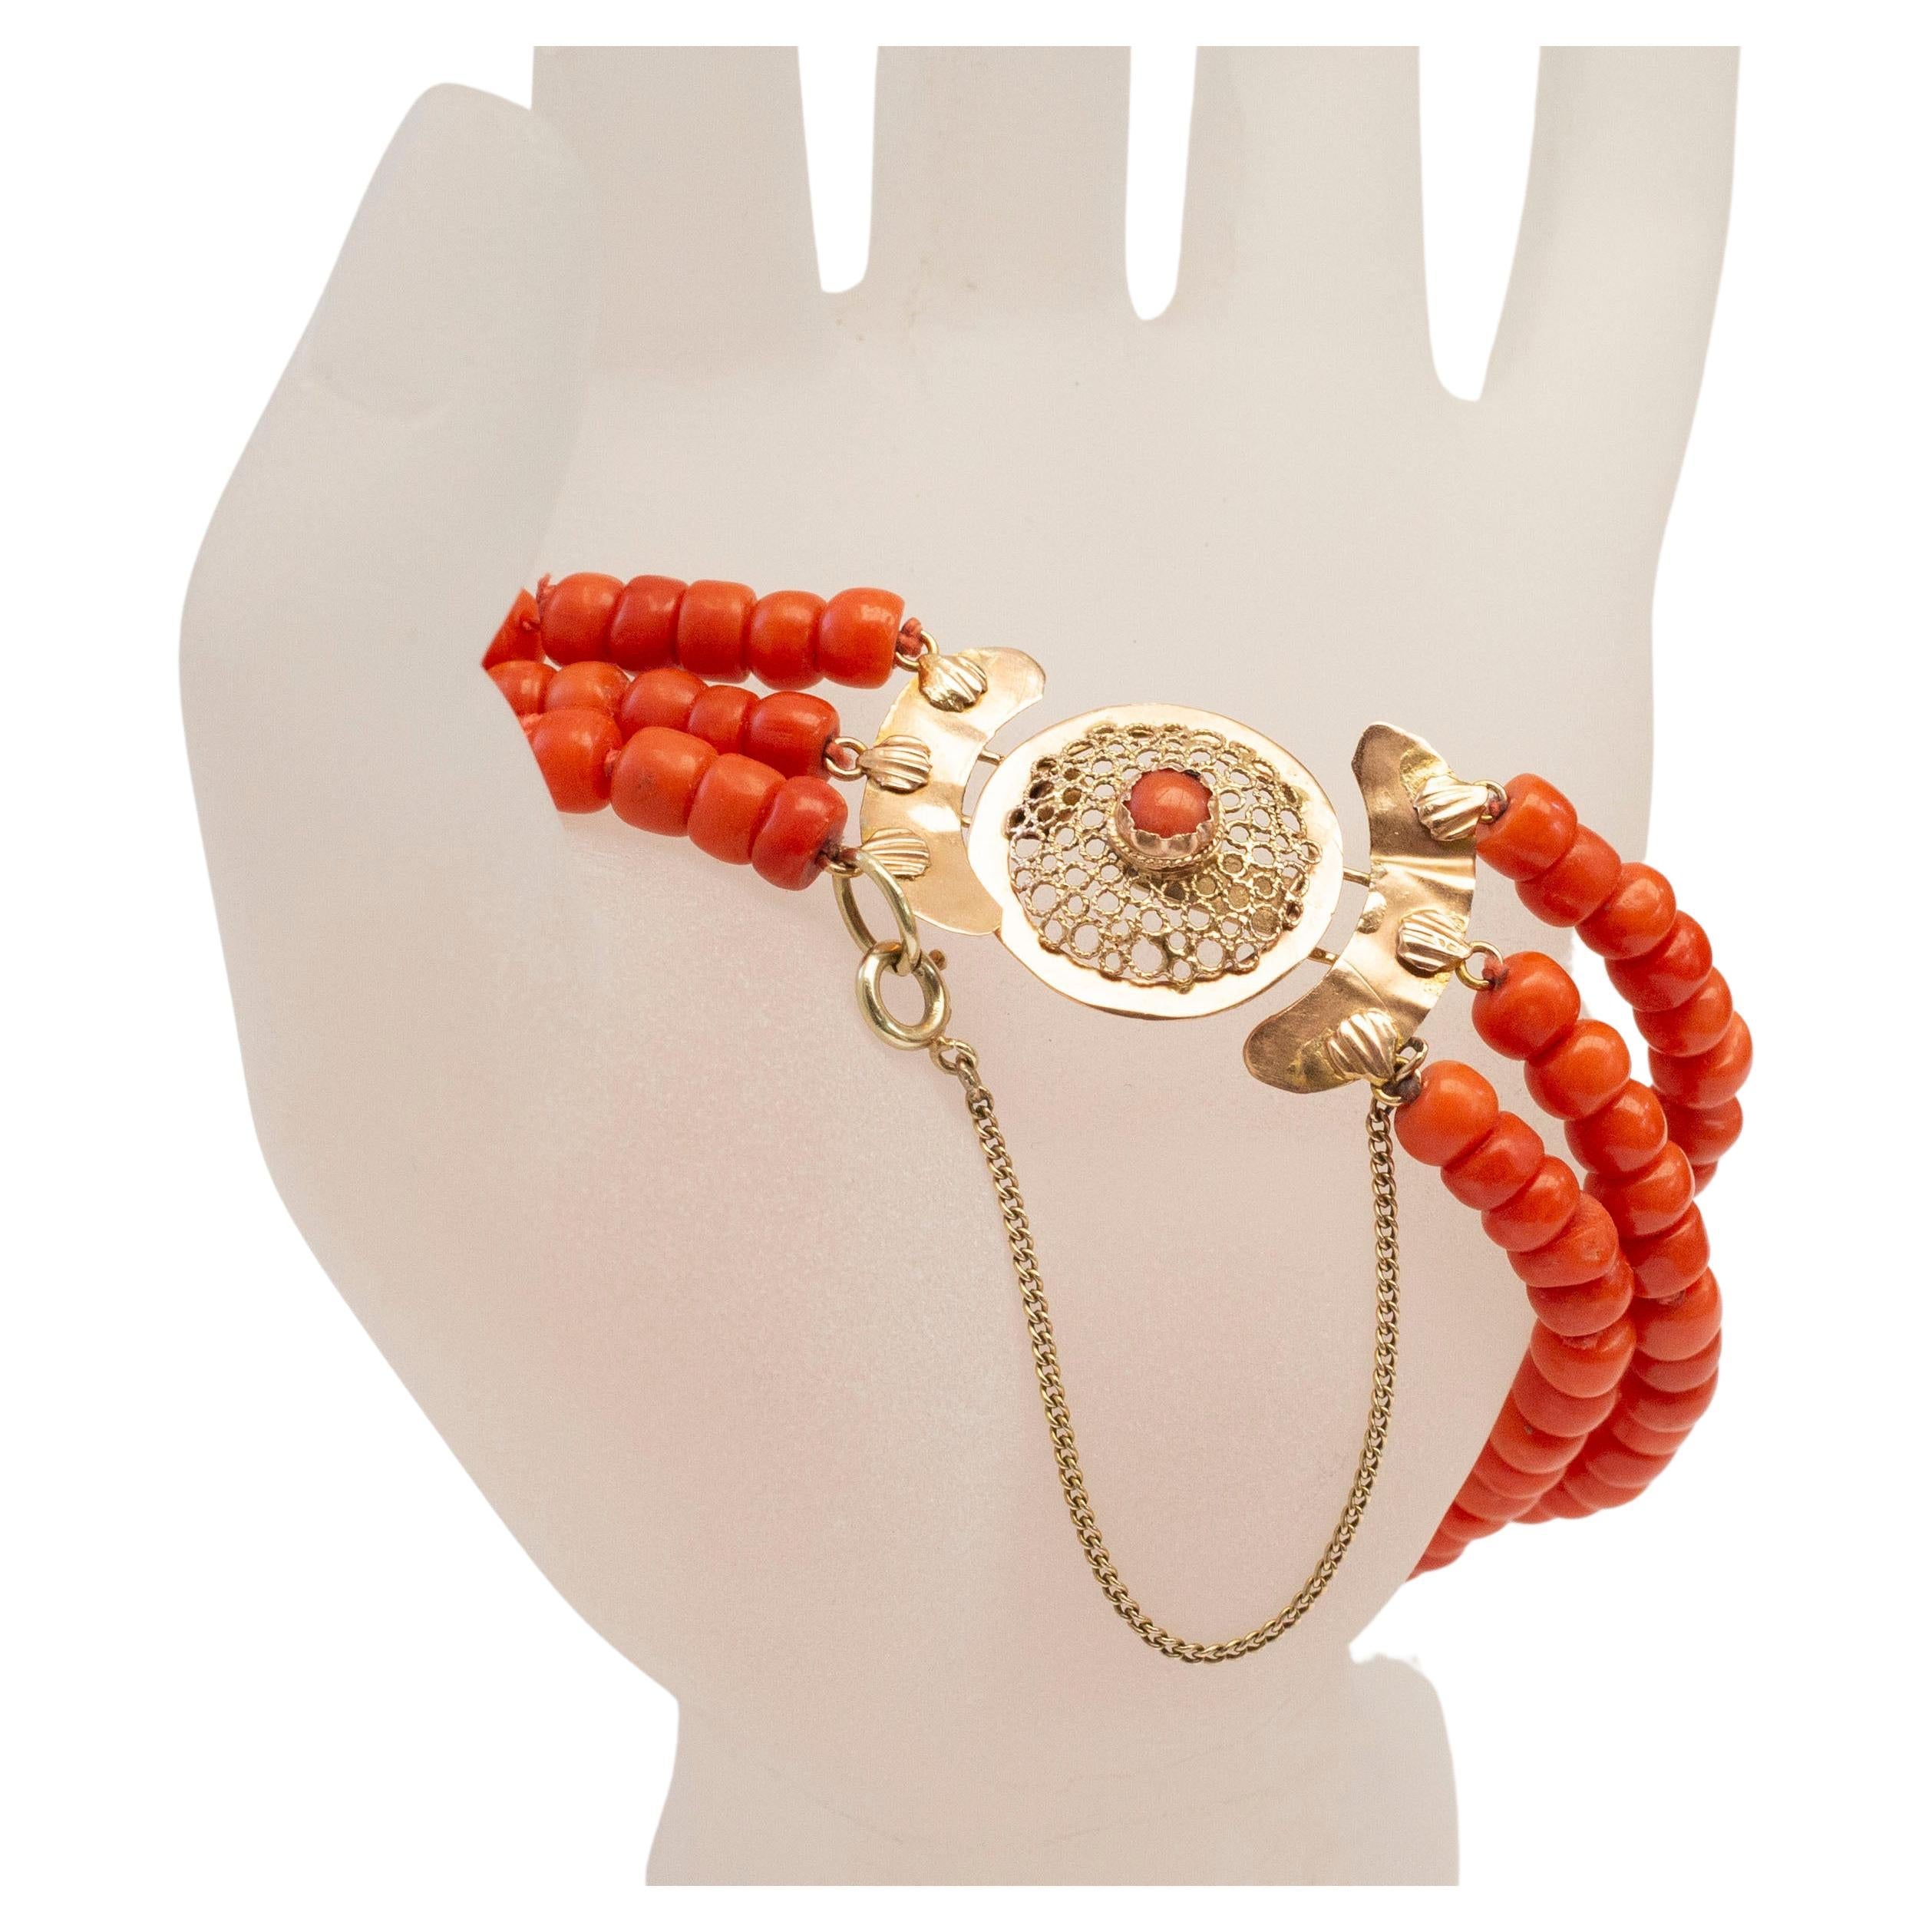 Antique 3-Row Red Coral Bracelet with Filigree 14 Karat Yellow Gold Clasp For Sale